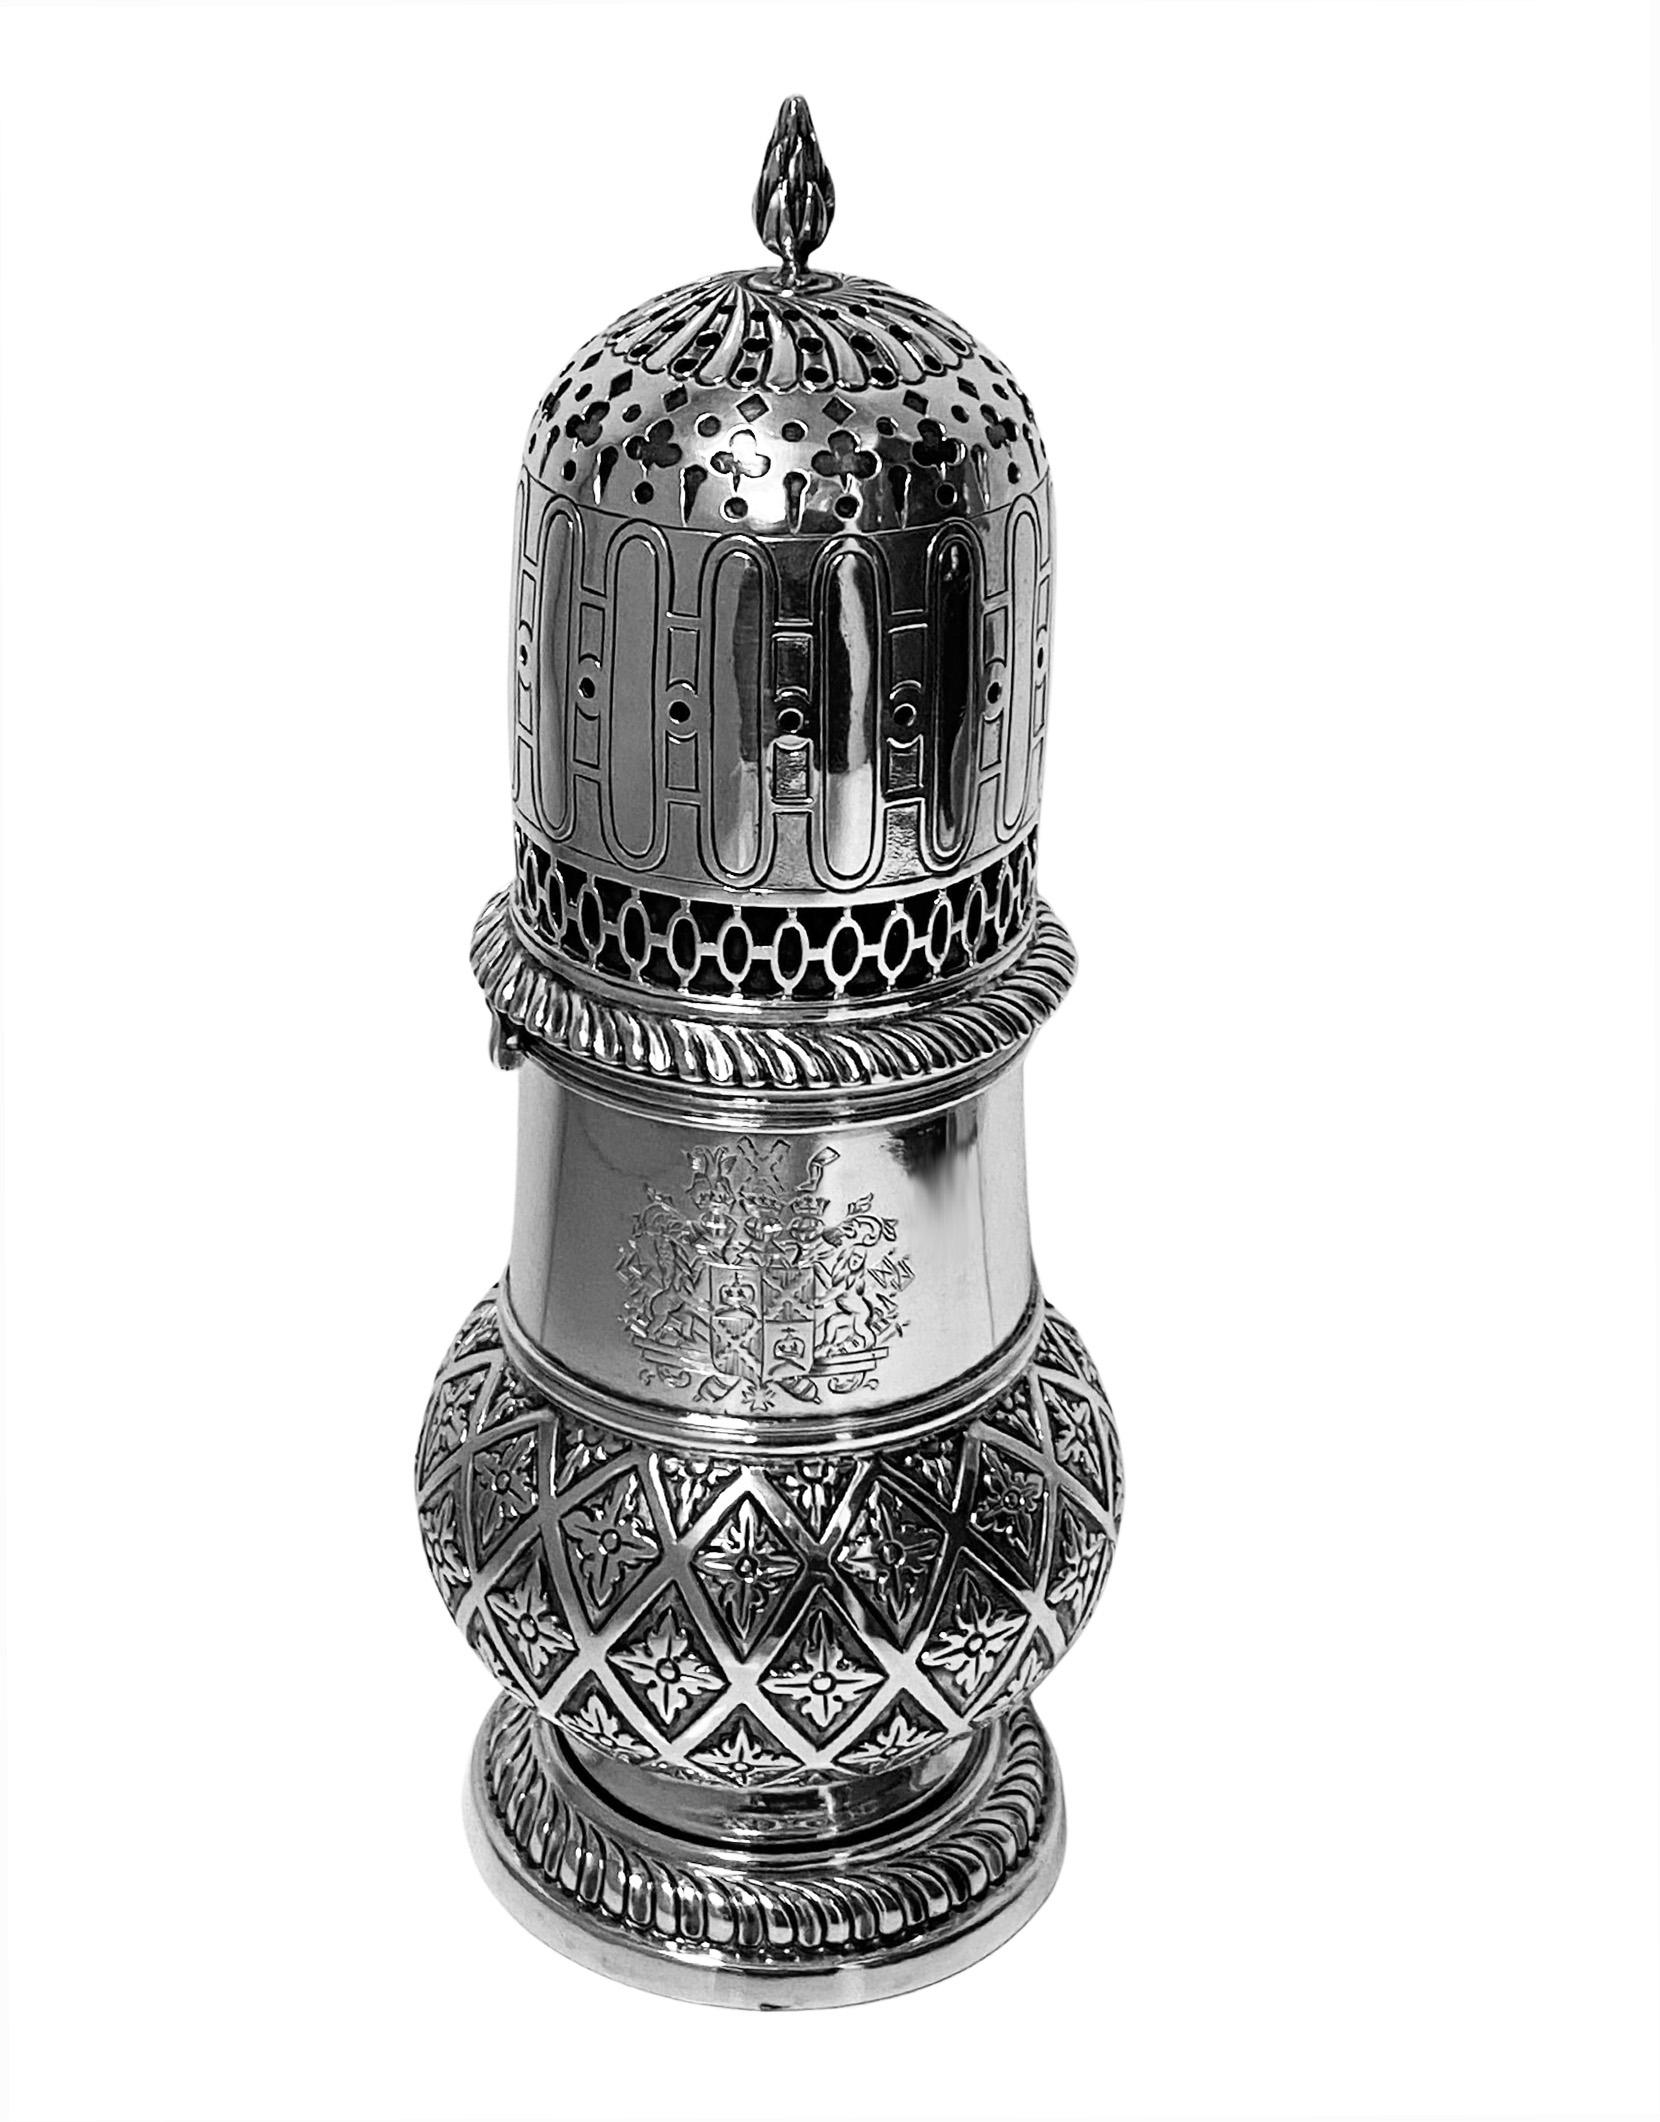 Antique large late 19th century Dutch Silver Caster. Early 18th century style, pierced and fluted cover with bayonet fitting, engraved with elaborate coat of arms, the lower body engraved with diaperwork enclosing foliate moifis surround on stippled